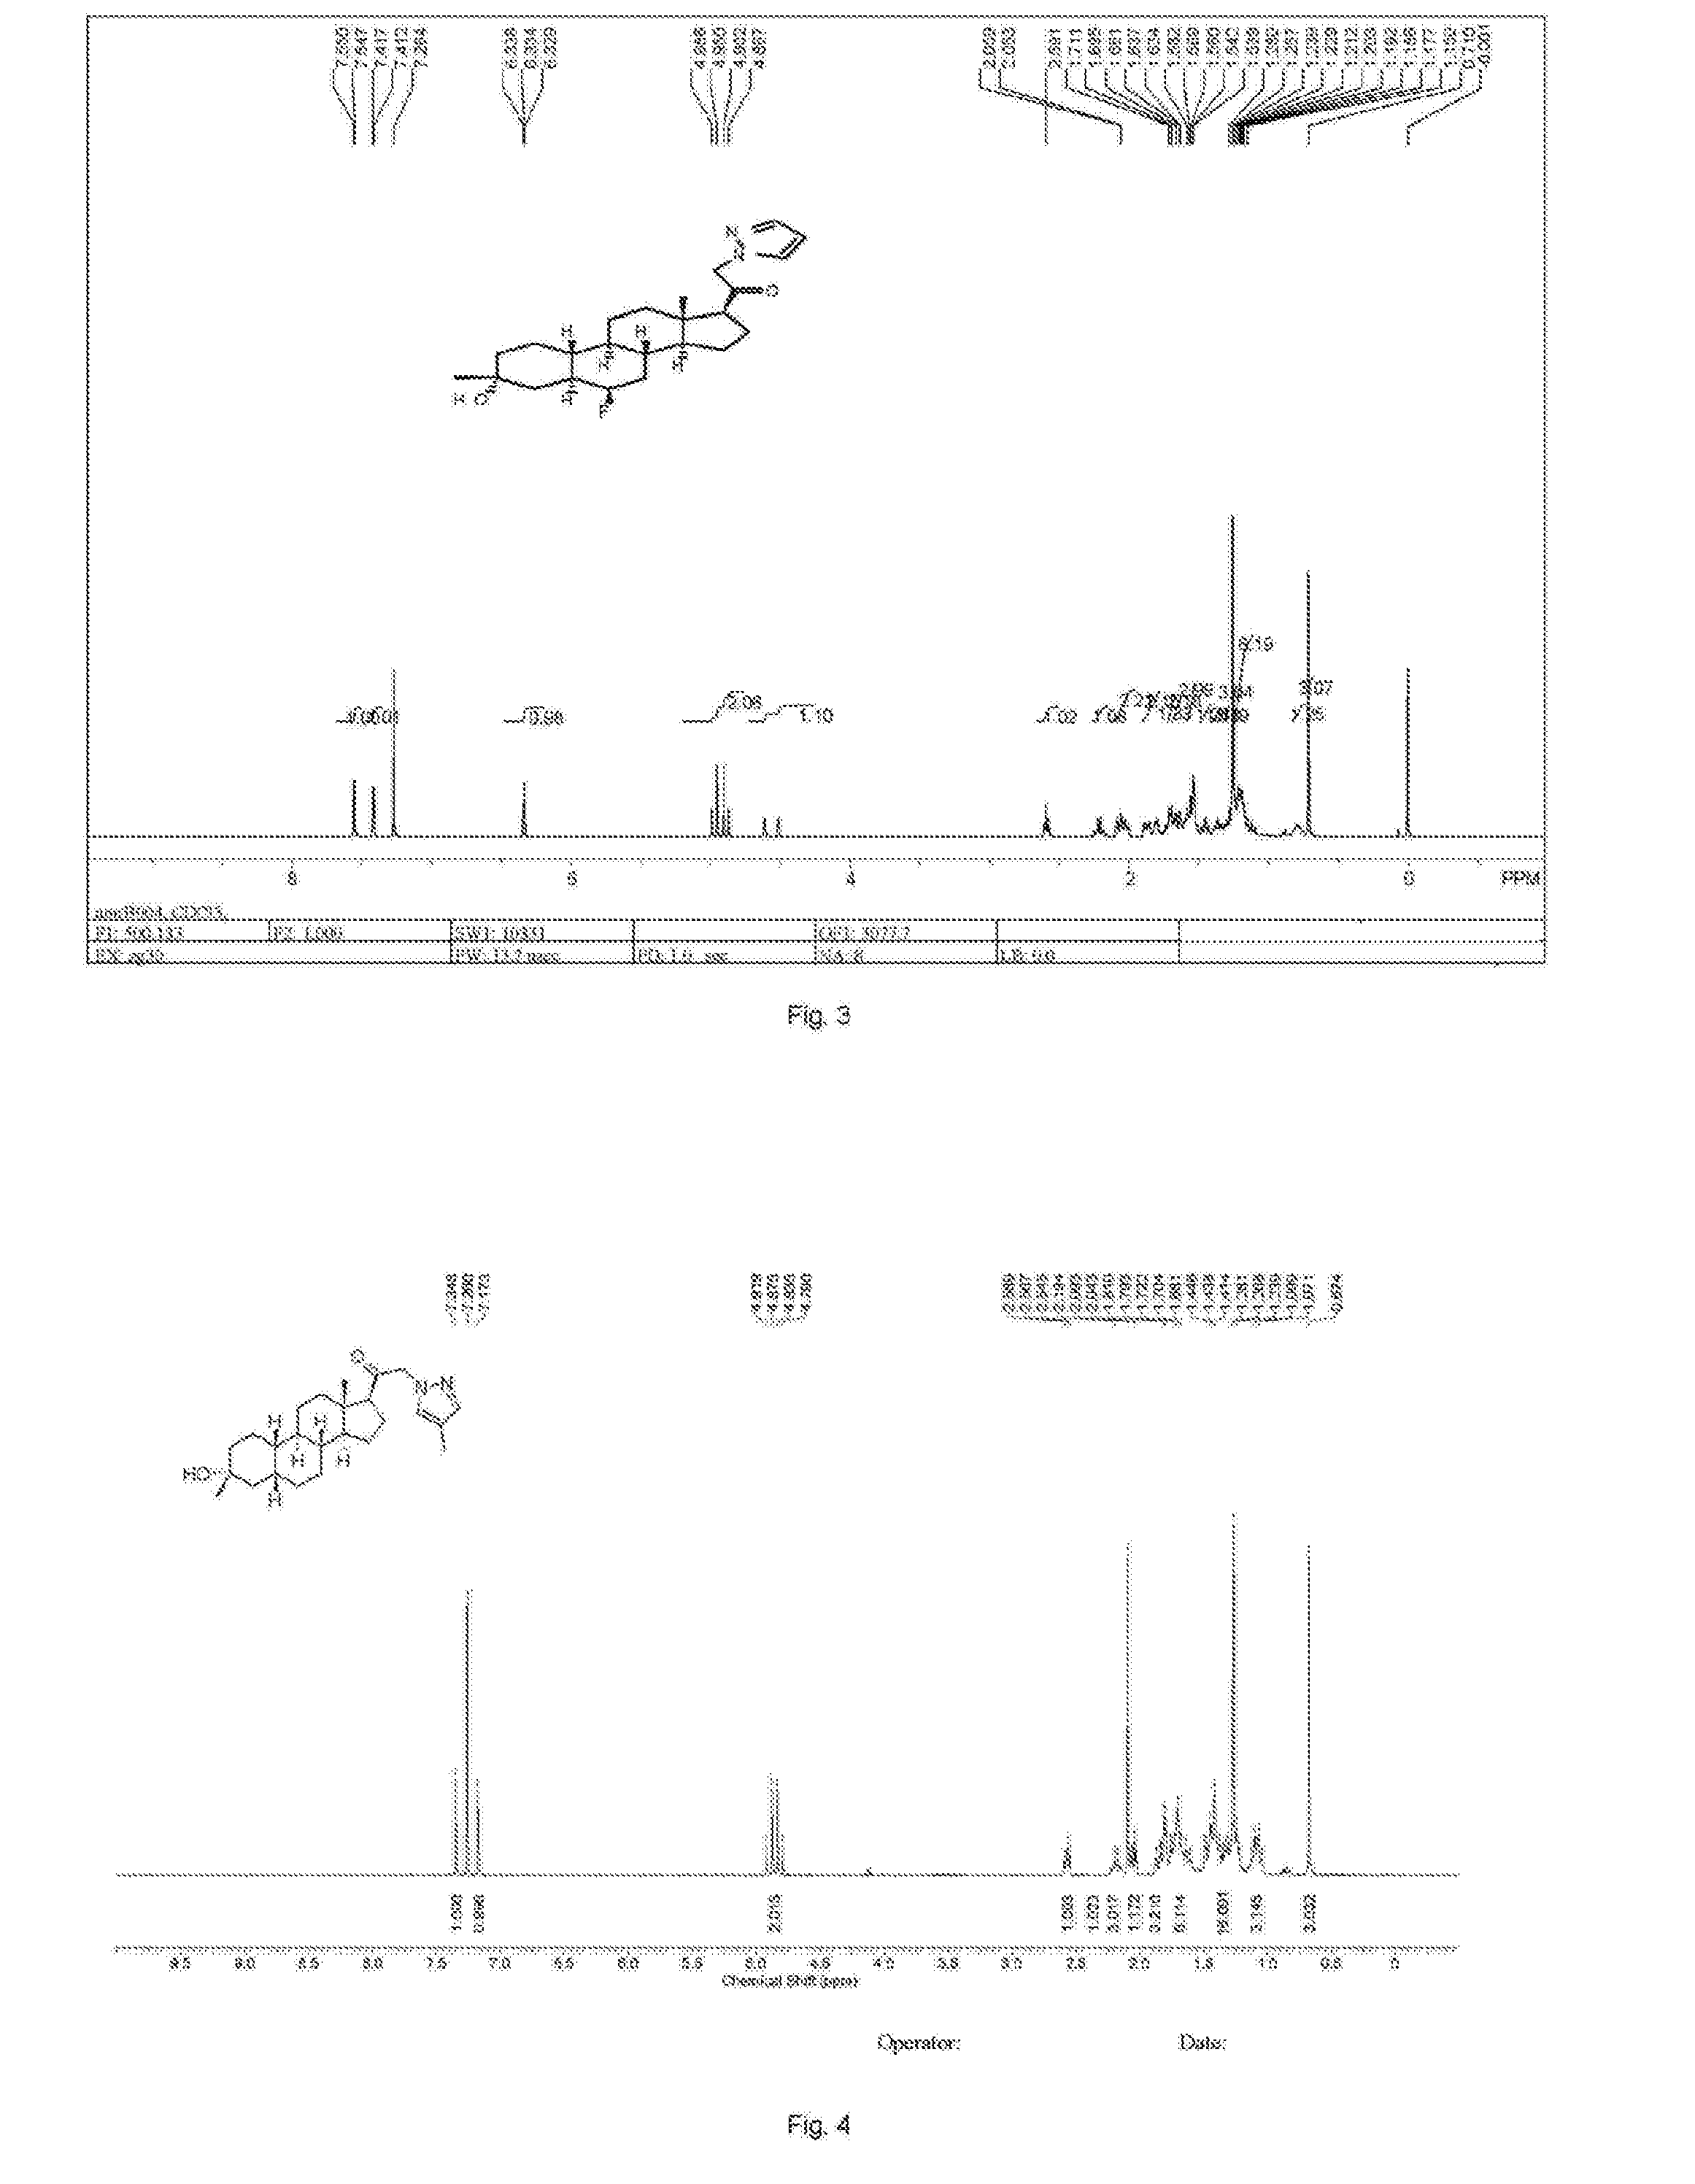 19-nor C3, 3-disubstituted C21-N-pyrazolyl steroids and methods of use thereof